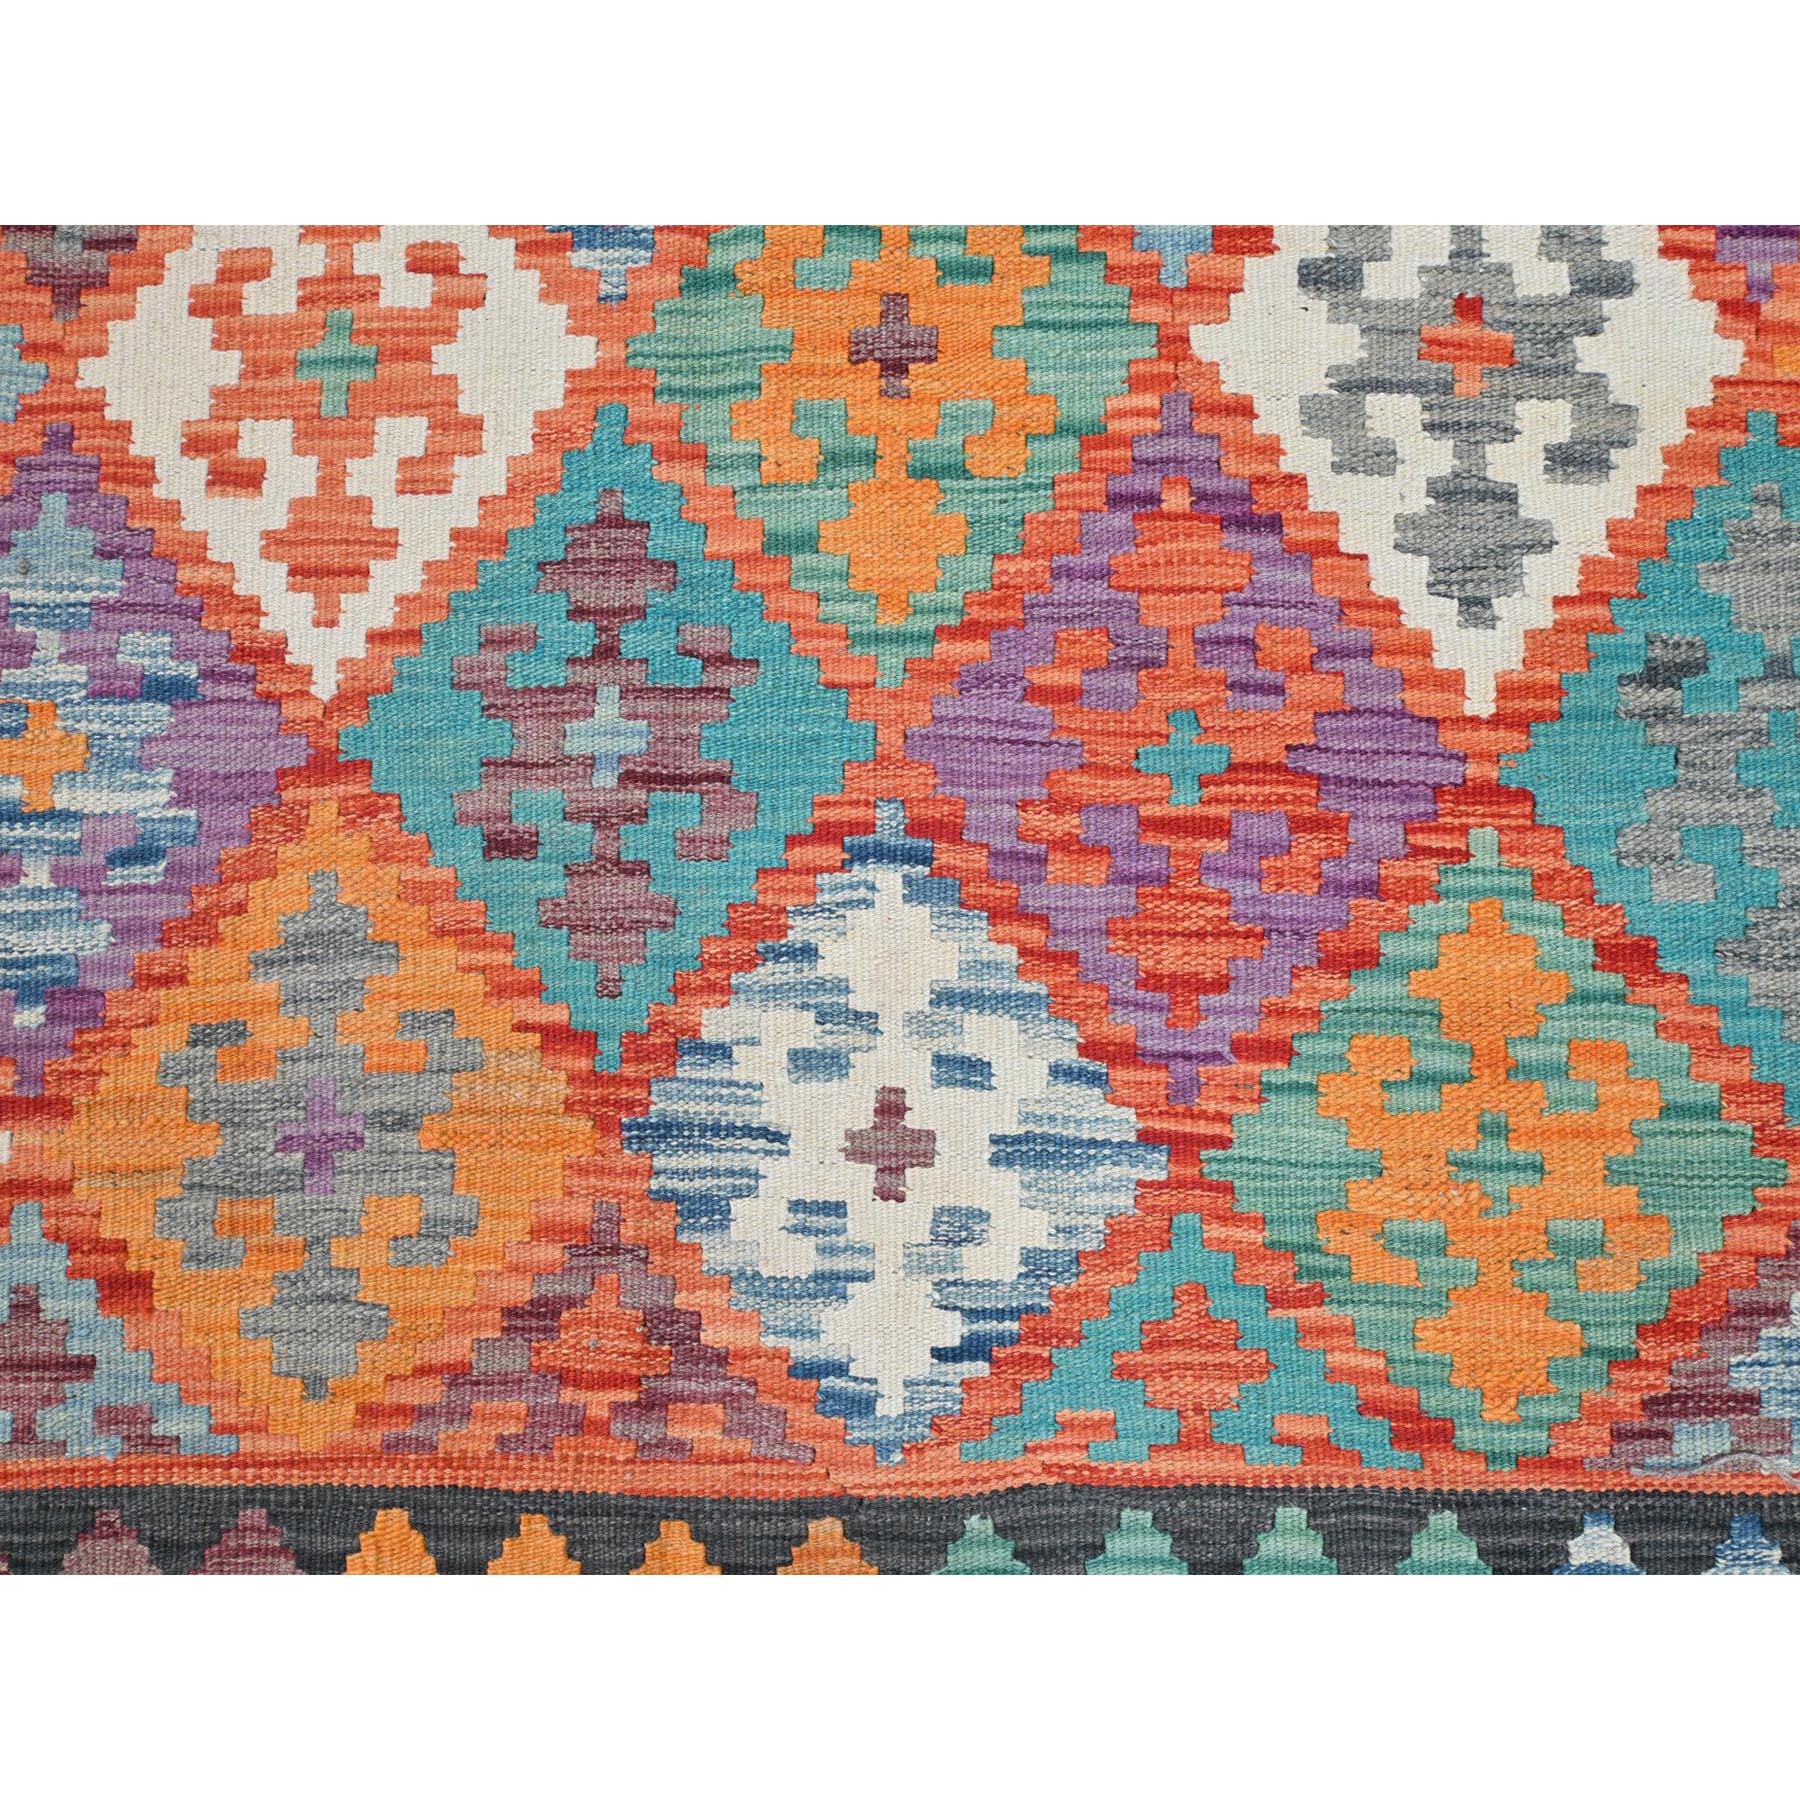 8'2"x11' Colorful, Veggie Dyes Pure Wool Hand Woven, Afghan Kilim with Geometric Elements Flat Weave, Reversible Oriental Rug 